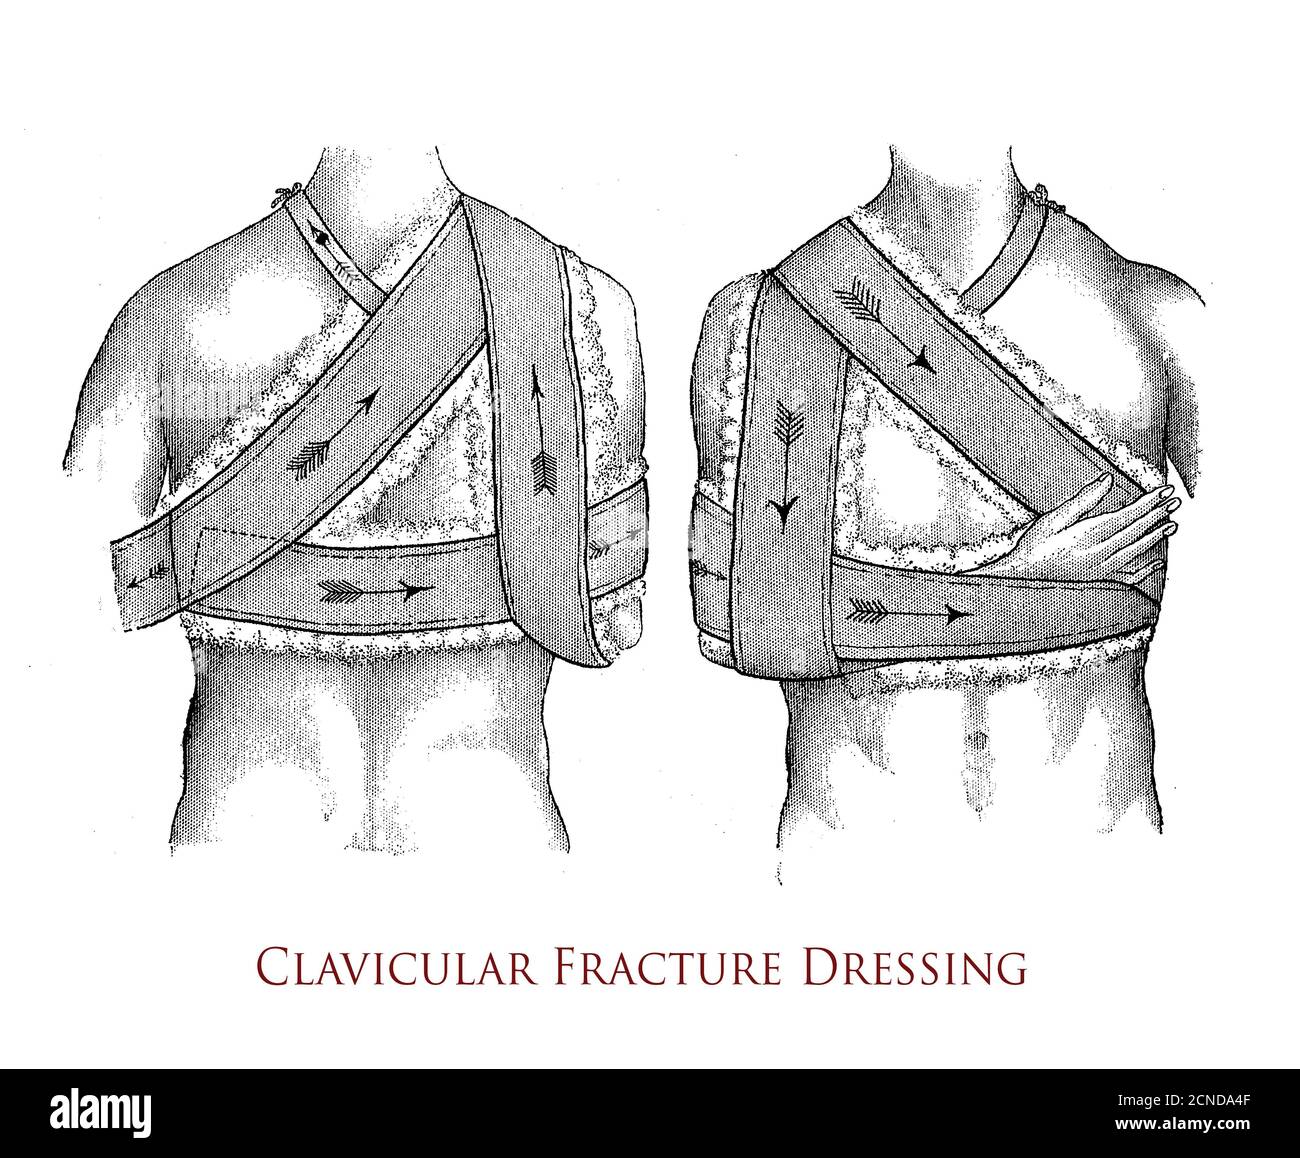 Healthcare and medicine: drawing explaining how to perform a clavicular fracture dressing, vintage illustration Stock Photo